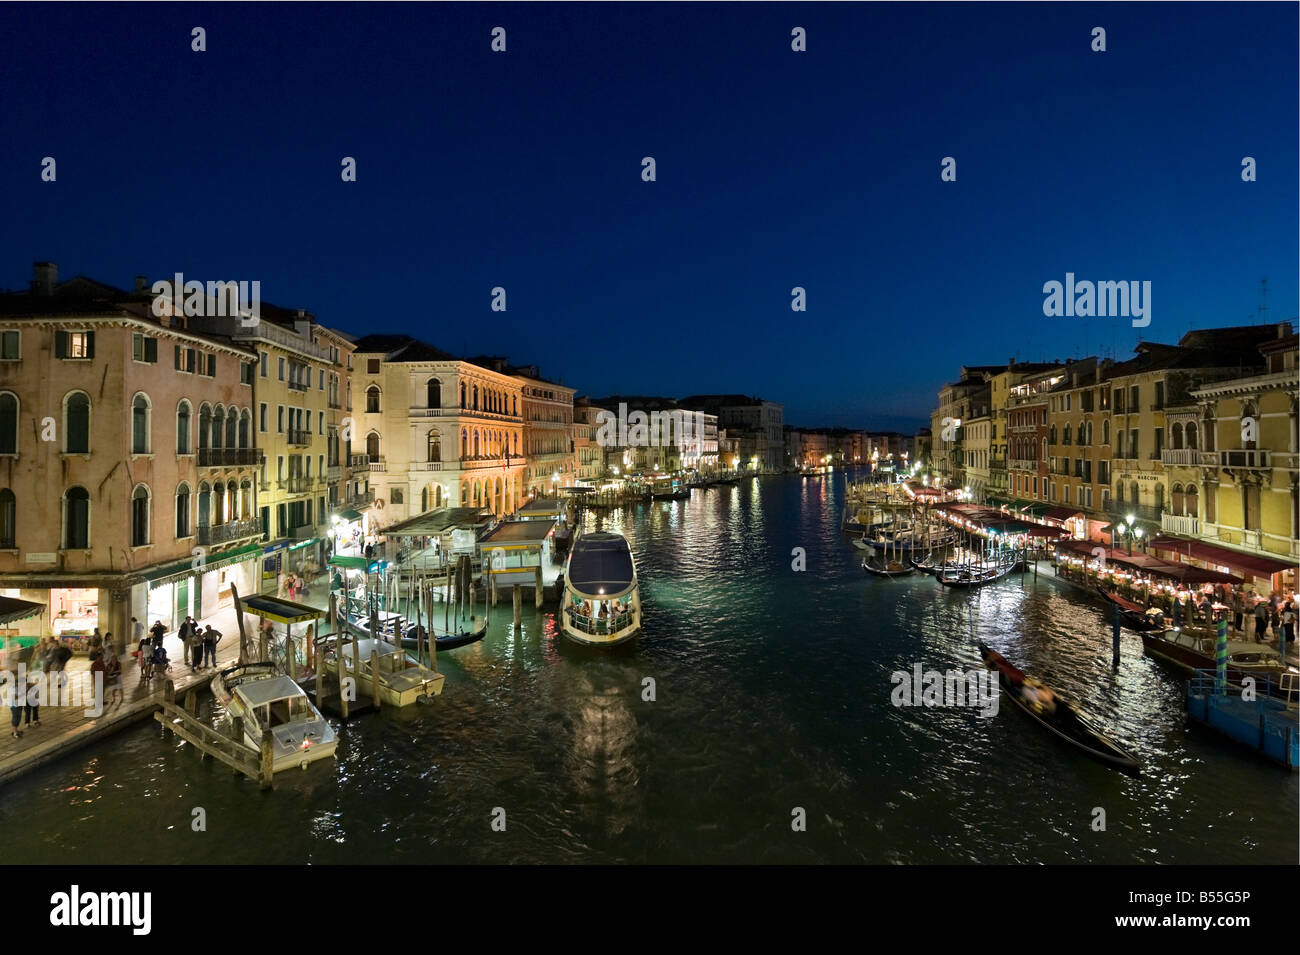 View of the Grand Canal from the Rialto Bridge at night, District of San Marco, Venice, Veneto, Italy Stock Photo